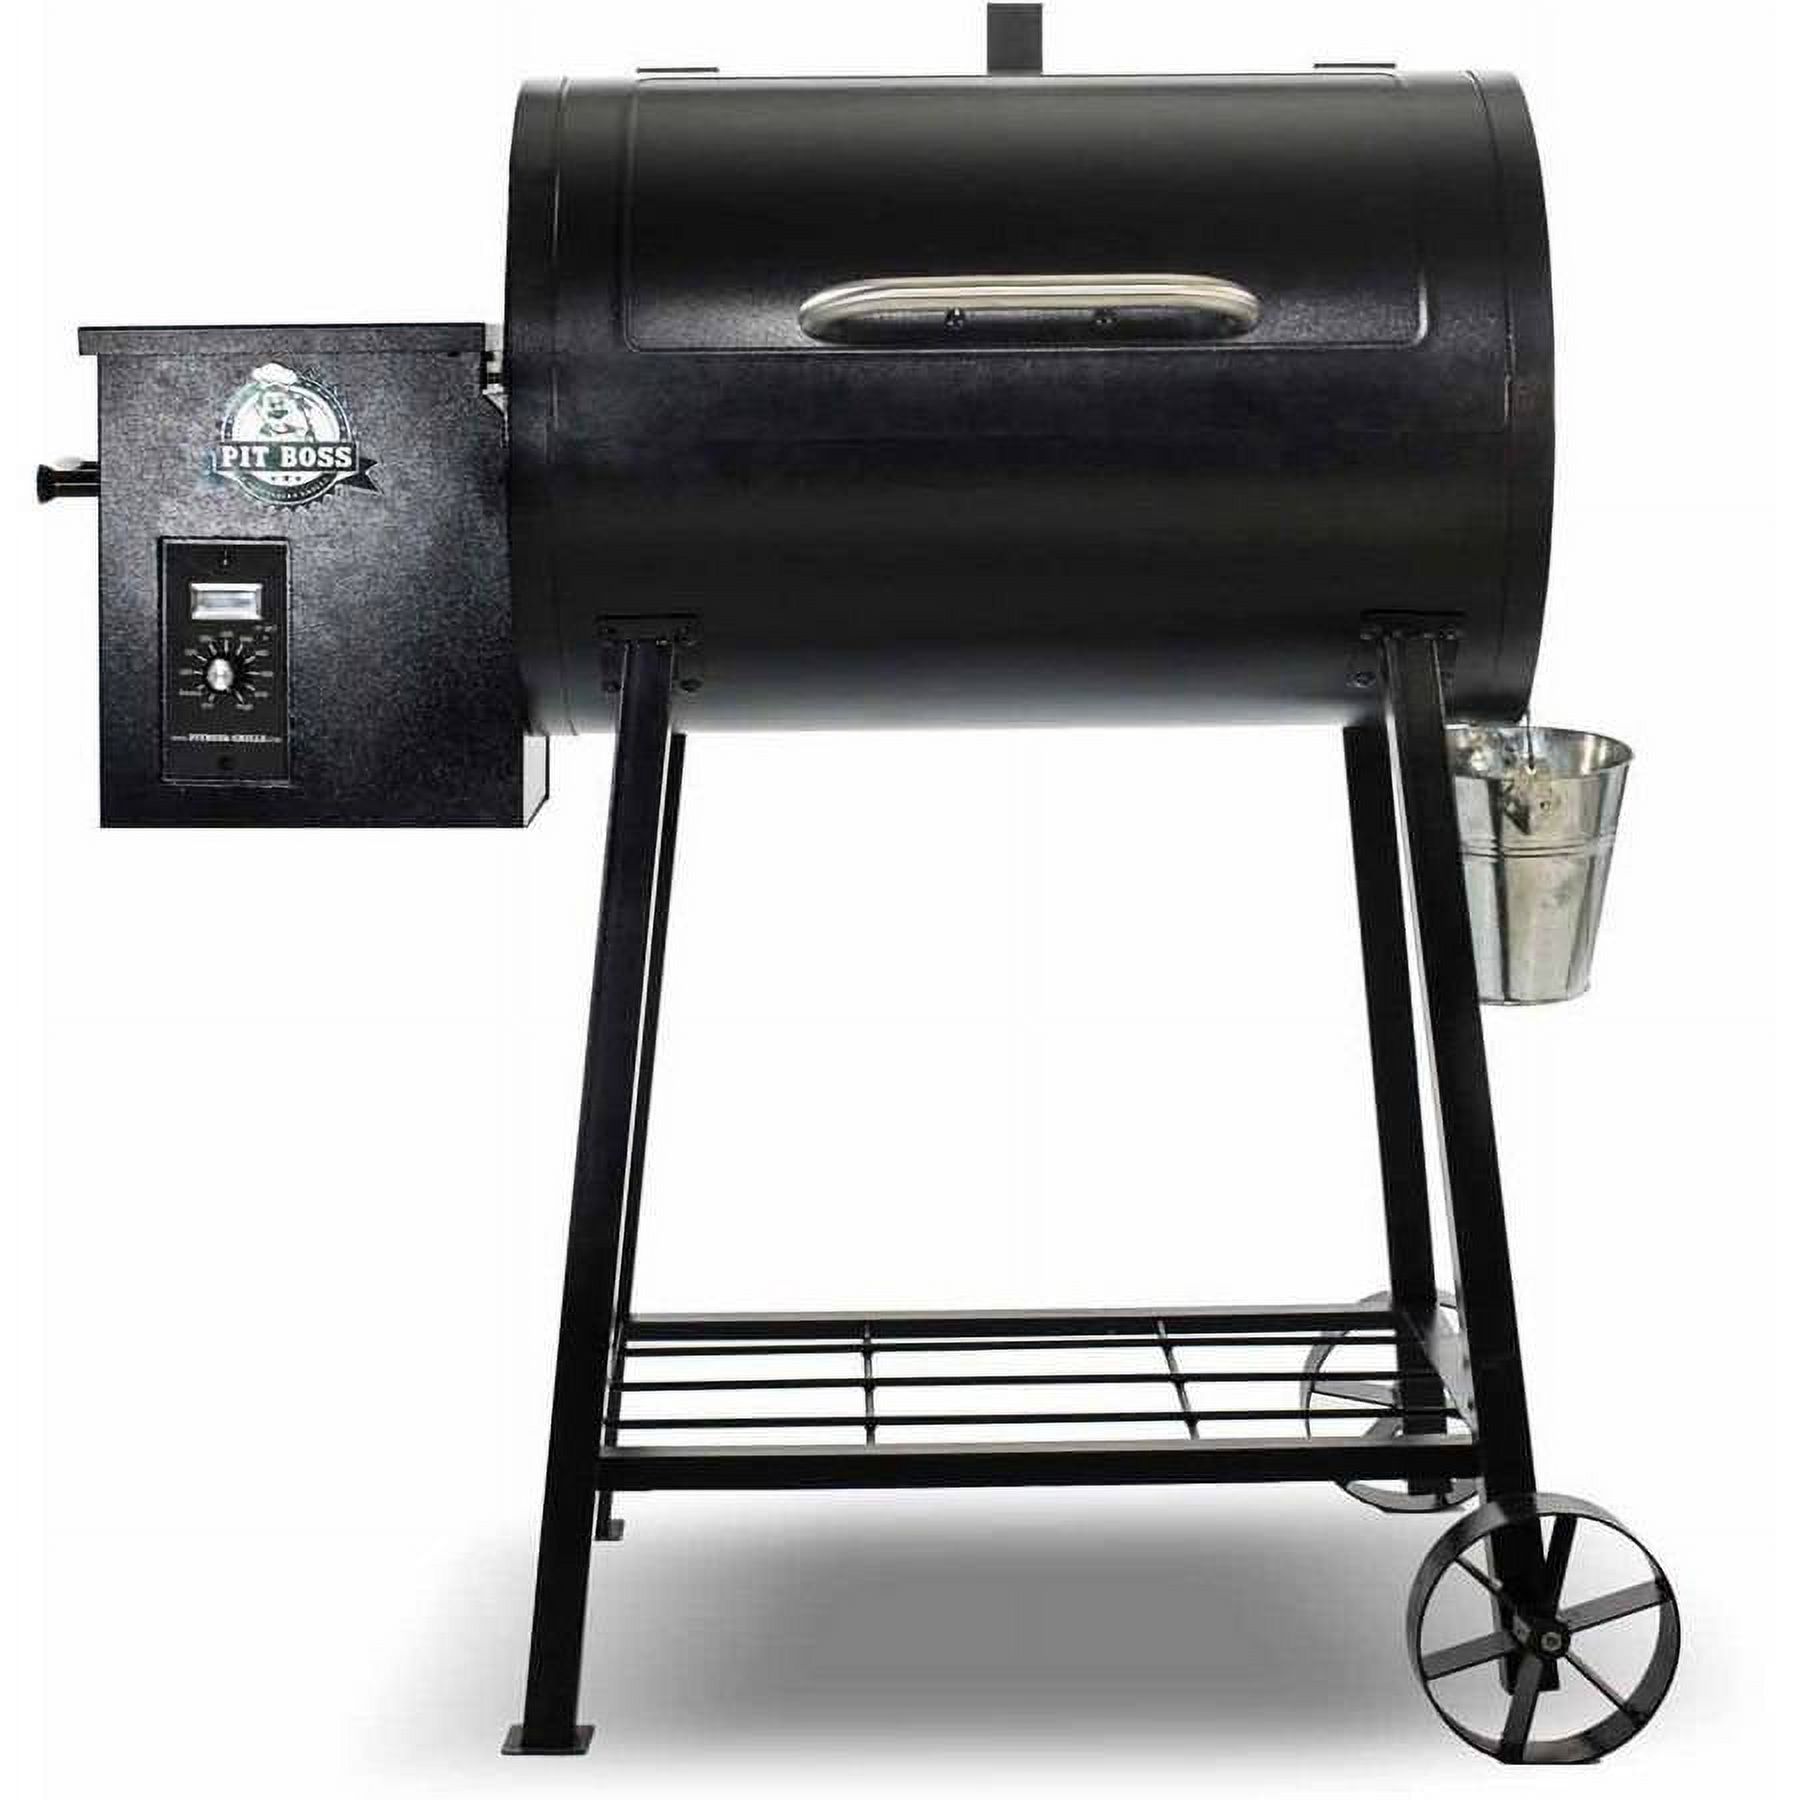 Pit Boss 2.36 sq ft Pellet Grill - image 1 of 11